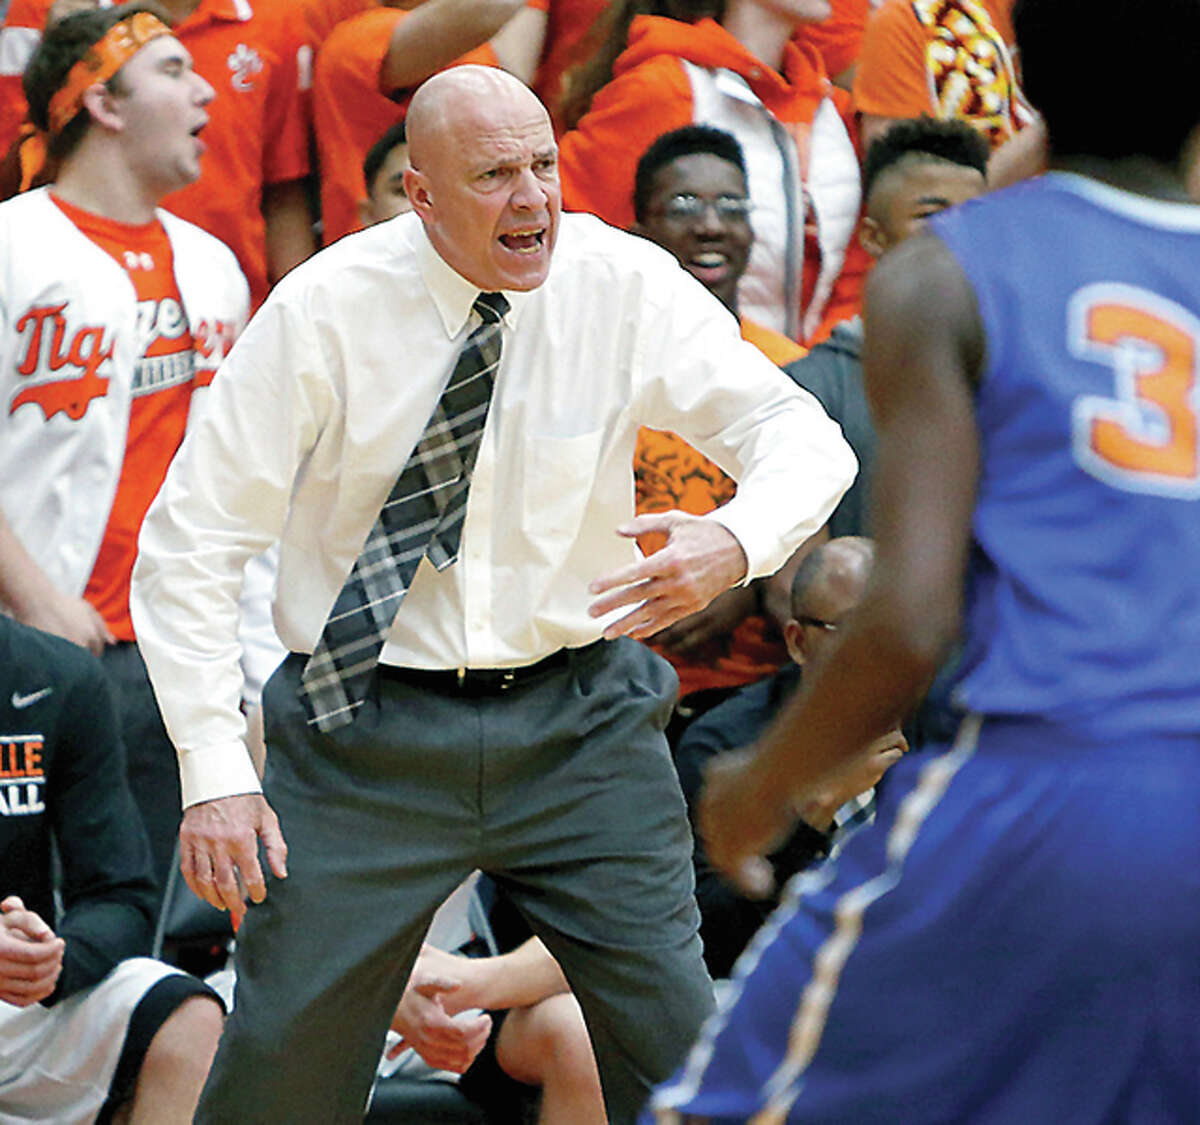 Edwardsville coach Mike Waldo shouts instructions during Friday night’s Southwestern Conference game in Edwardsville.